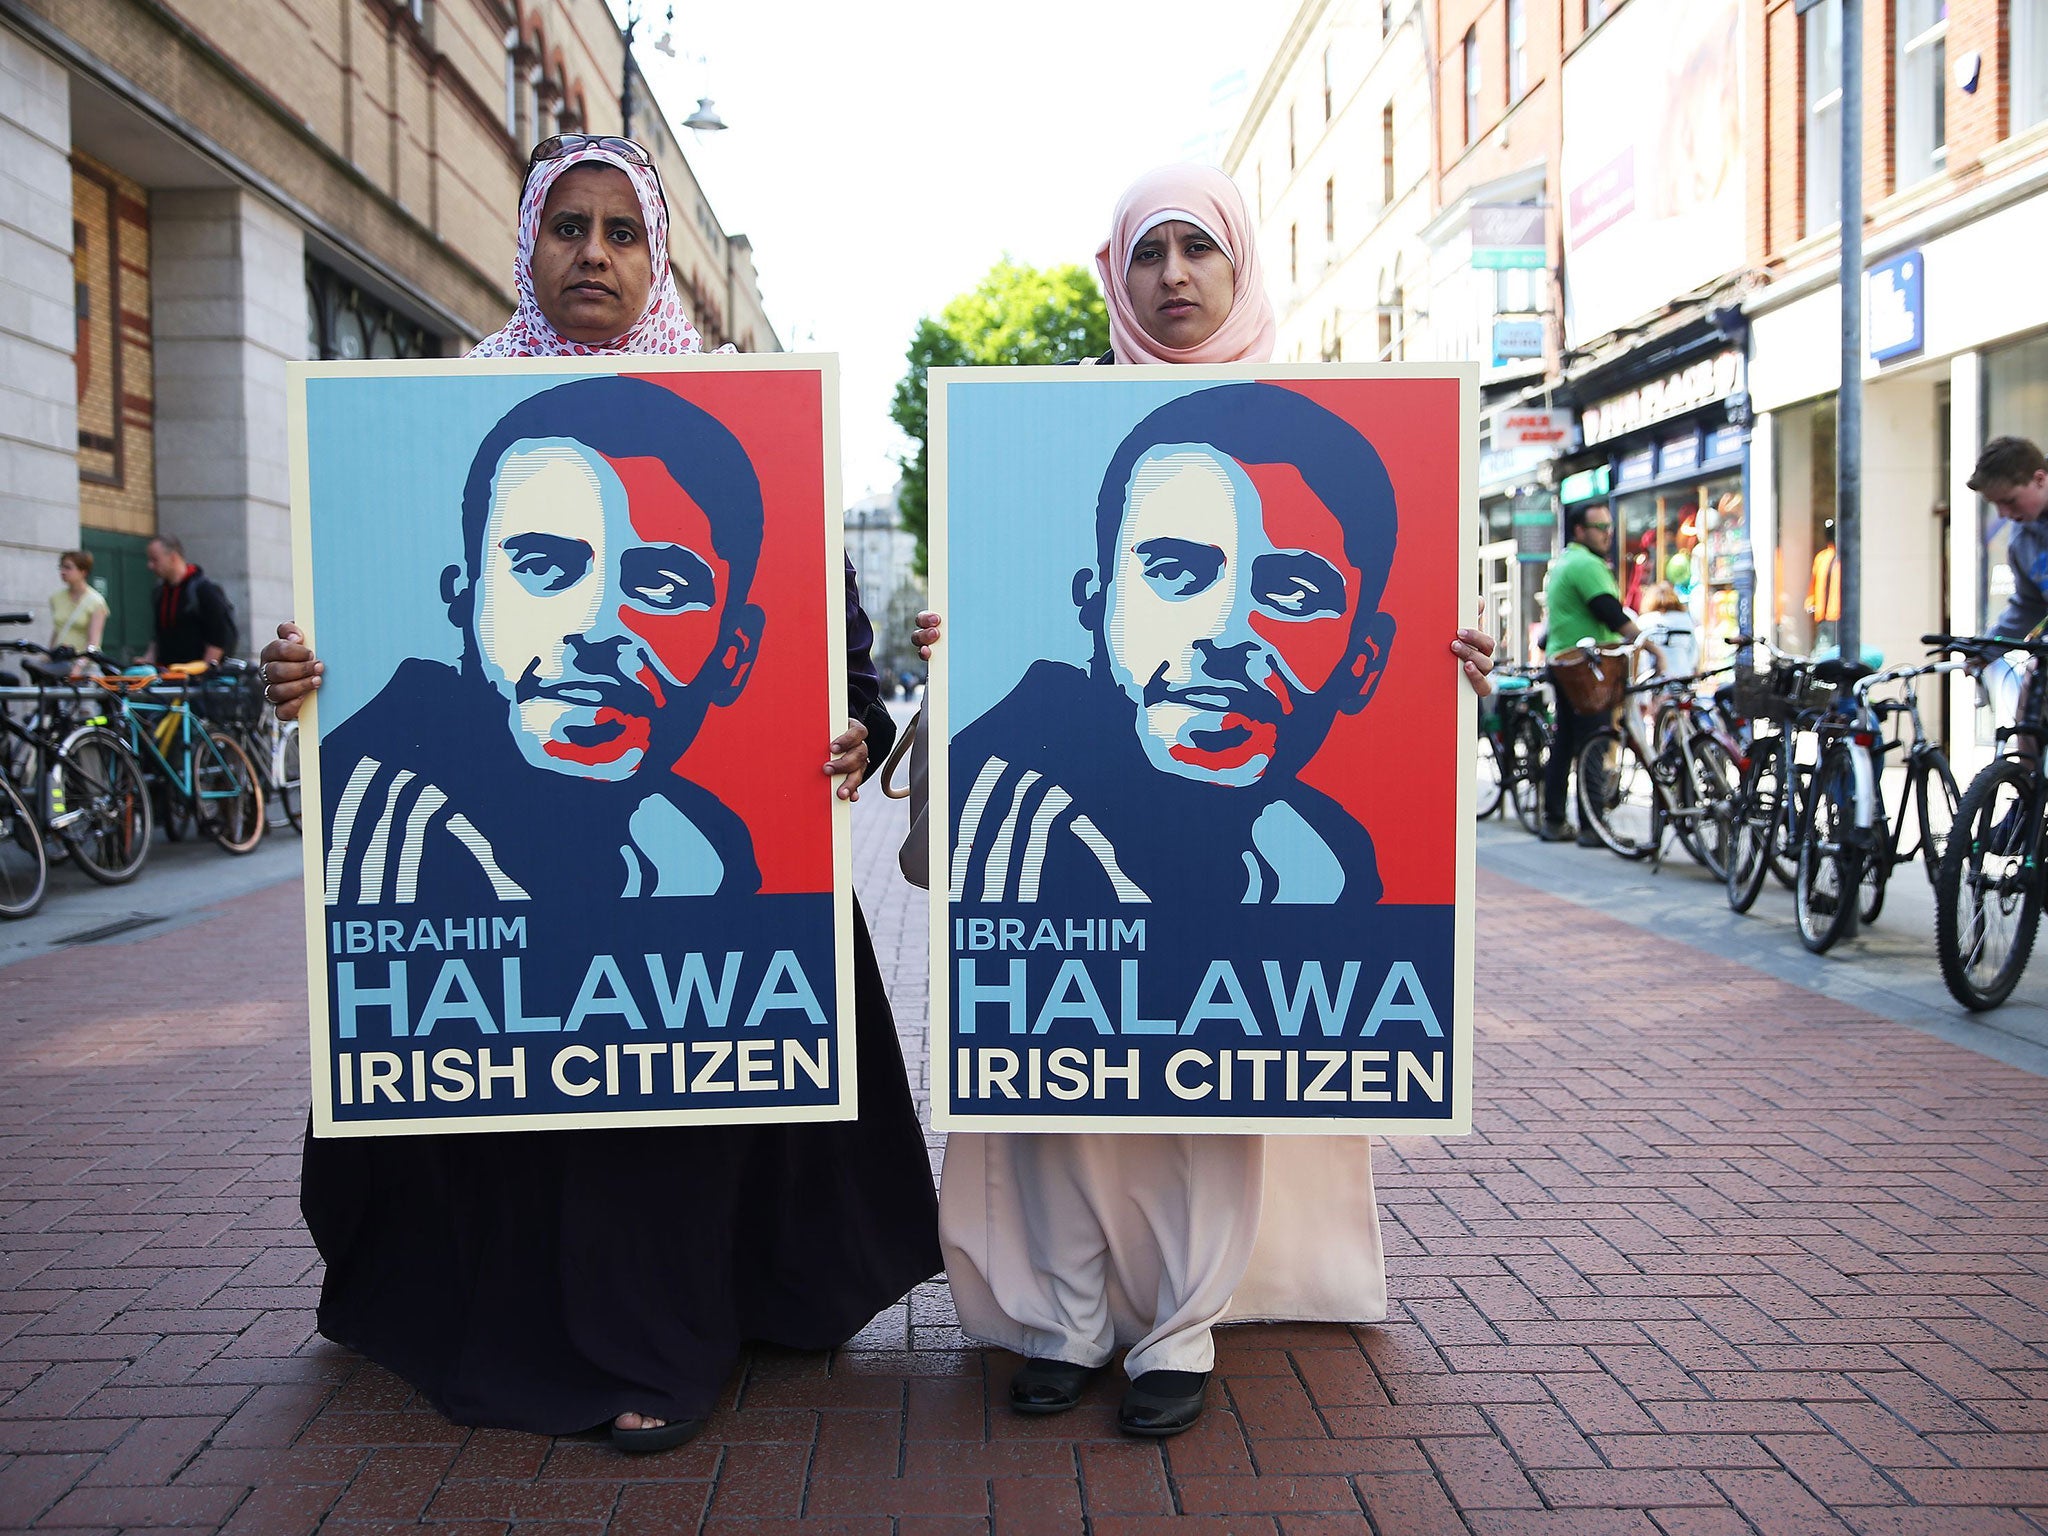 Nosayba (left) and Somaia Halawa, sisters of Ibrahim Halawa, on Grafton Street in Dublin's city centre, where family members and supporters held an awareness day